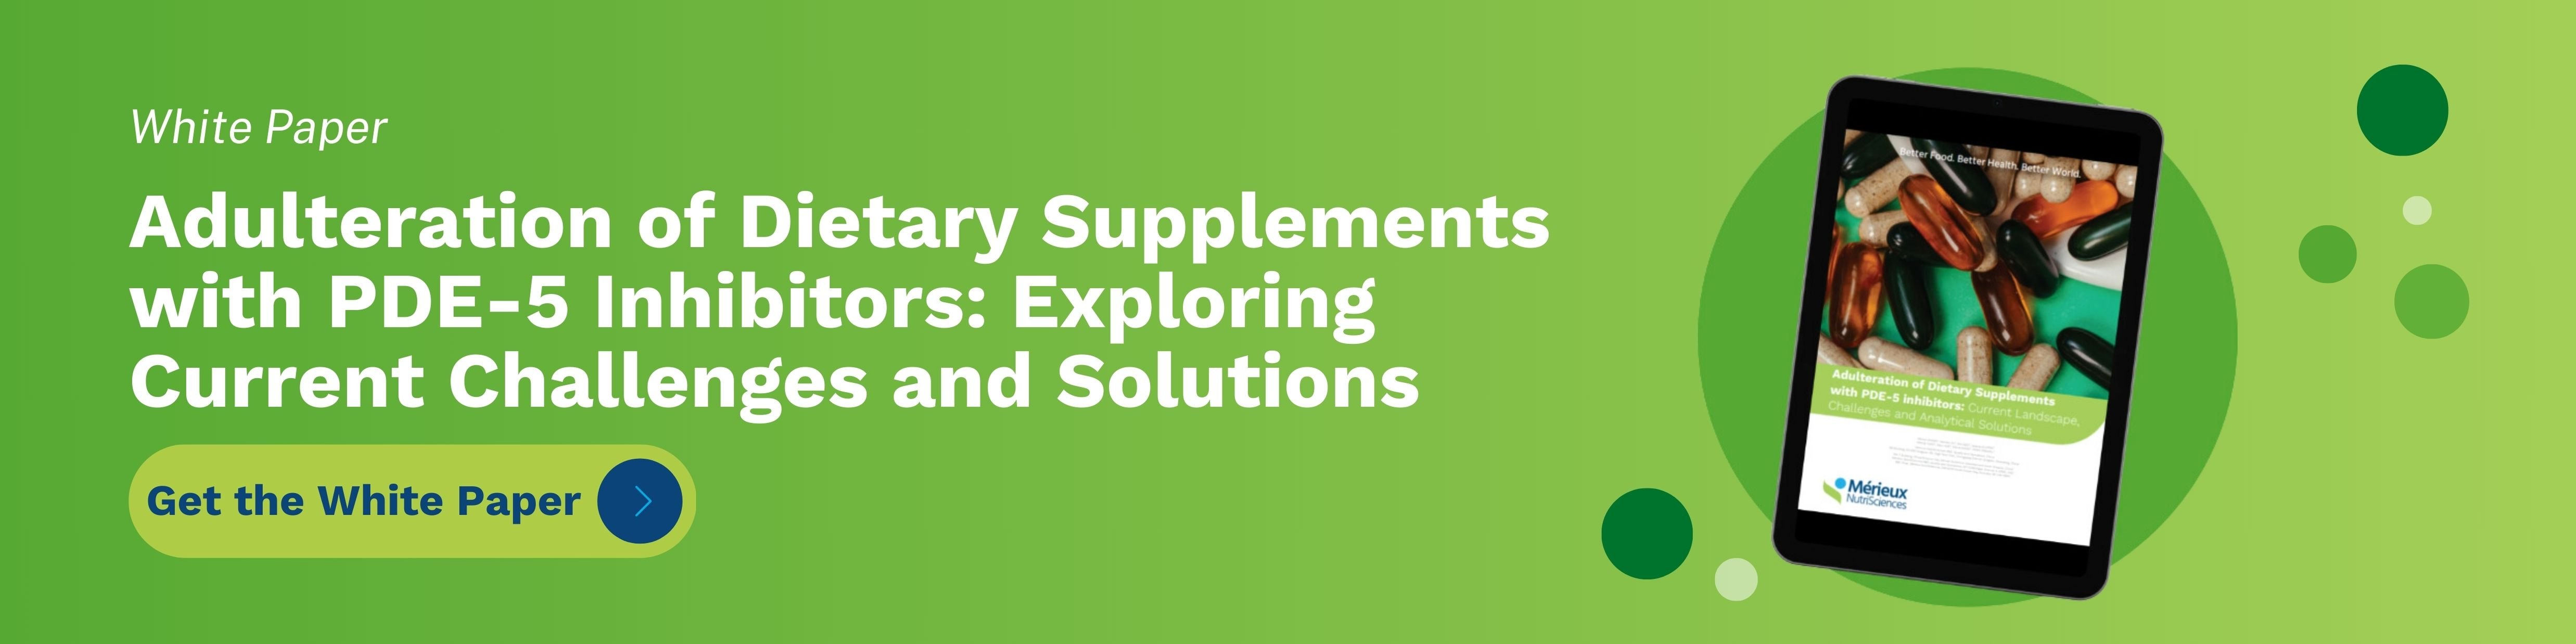 MxNS Dietary Supplements White Paper